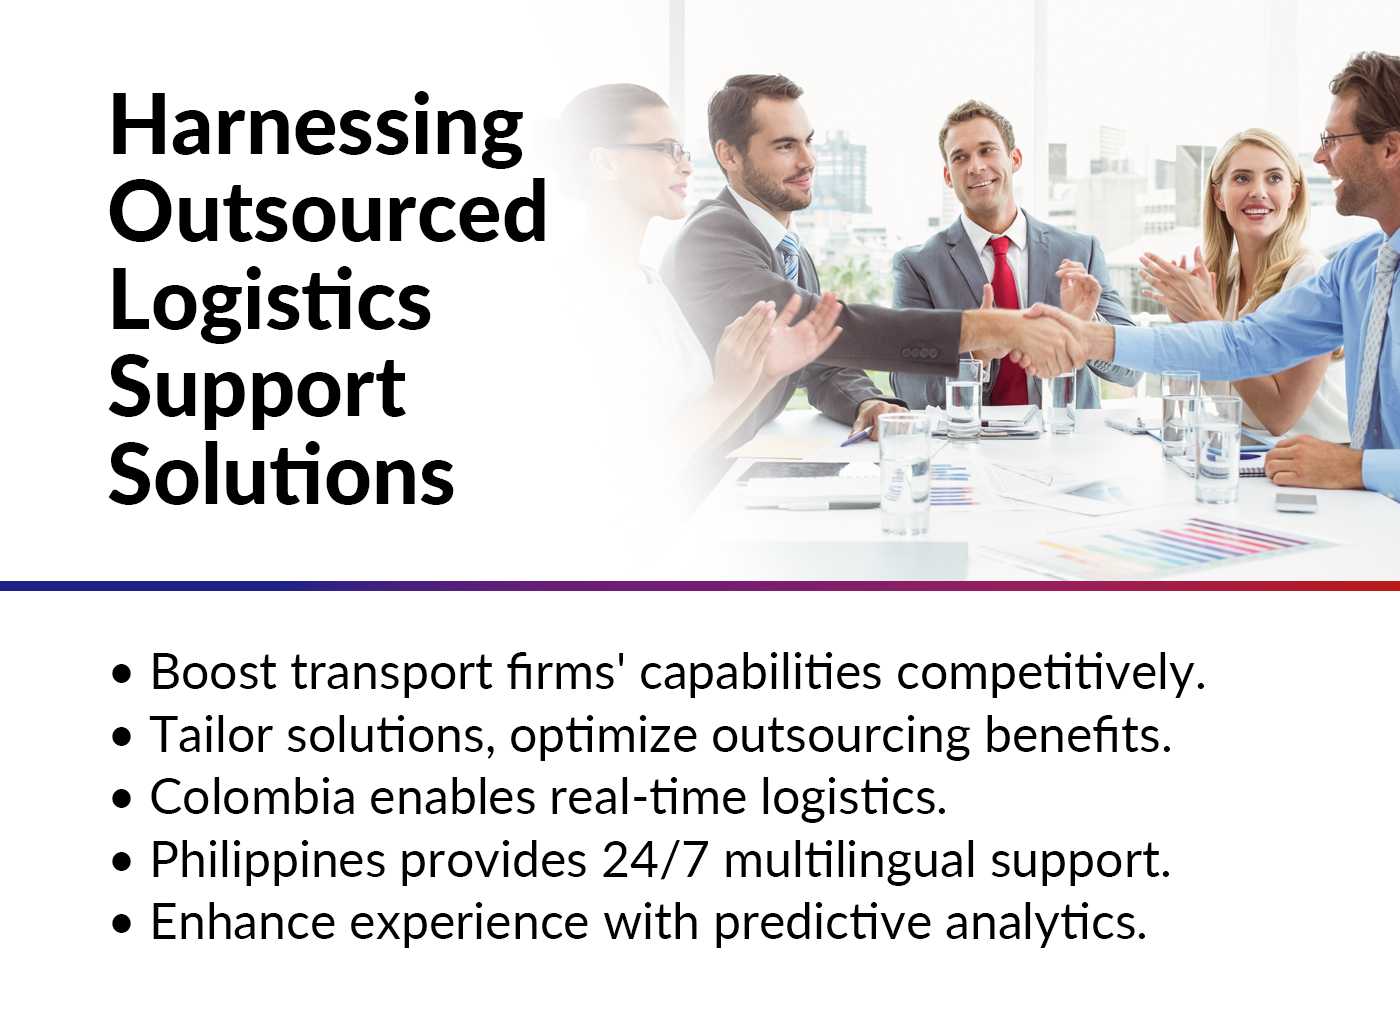 A mini infographic shows how harnessing outsourced logistics support helps transport and logistics firms